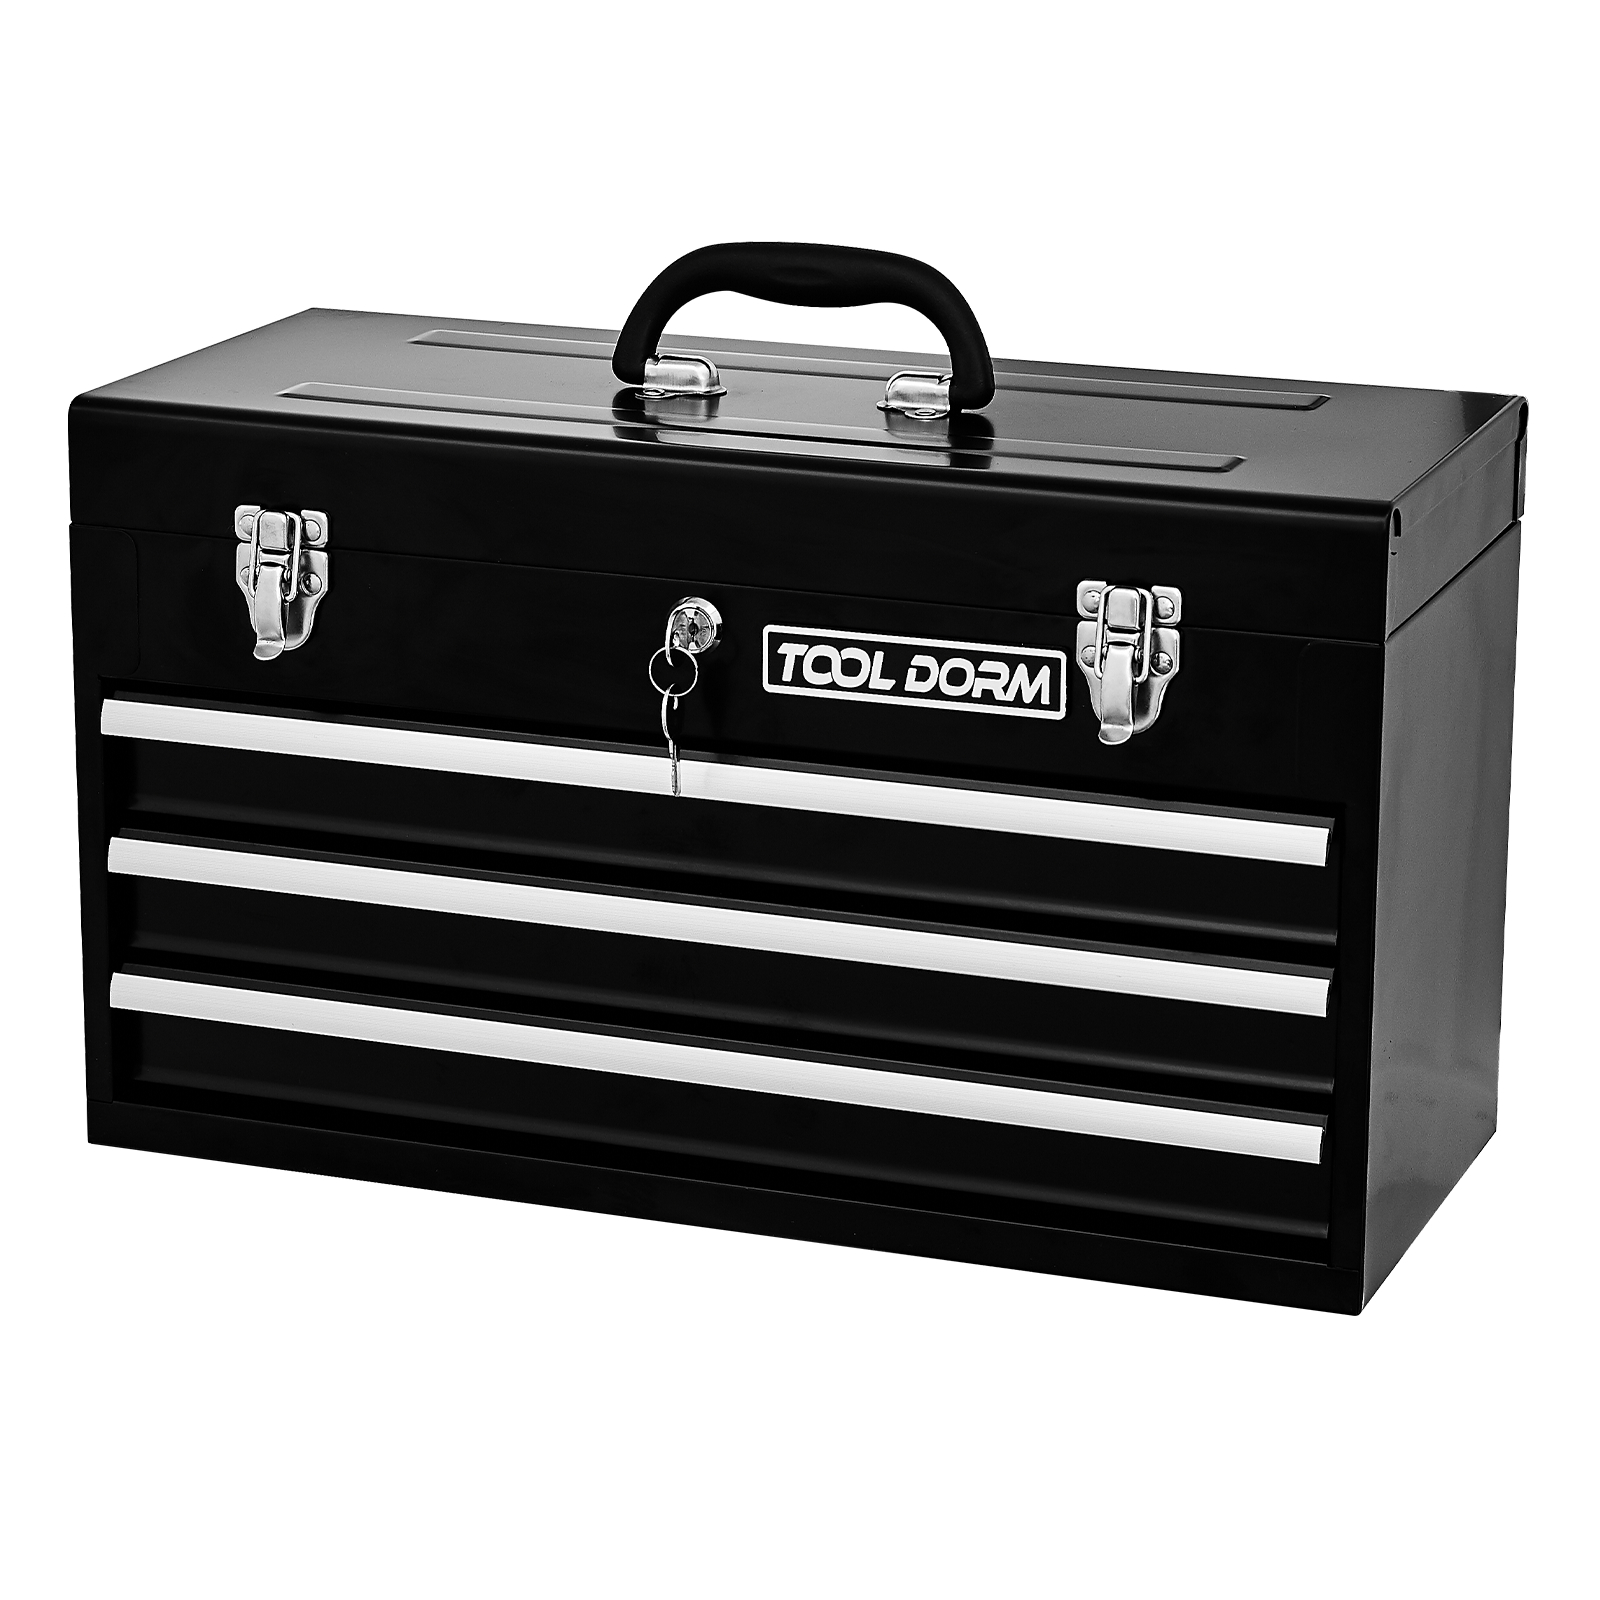 

20.3" Metal Tool Box With Drawers Portable Steel Tool Chest With Metal Cylinder Lock And Latch Closure, Black Powder Coating, Suitable For Garage, Warehouse And Outdoor Repair Job